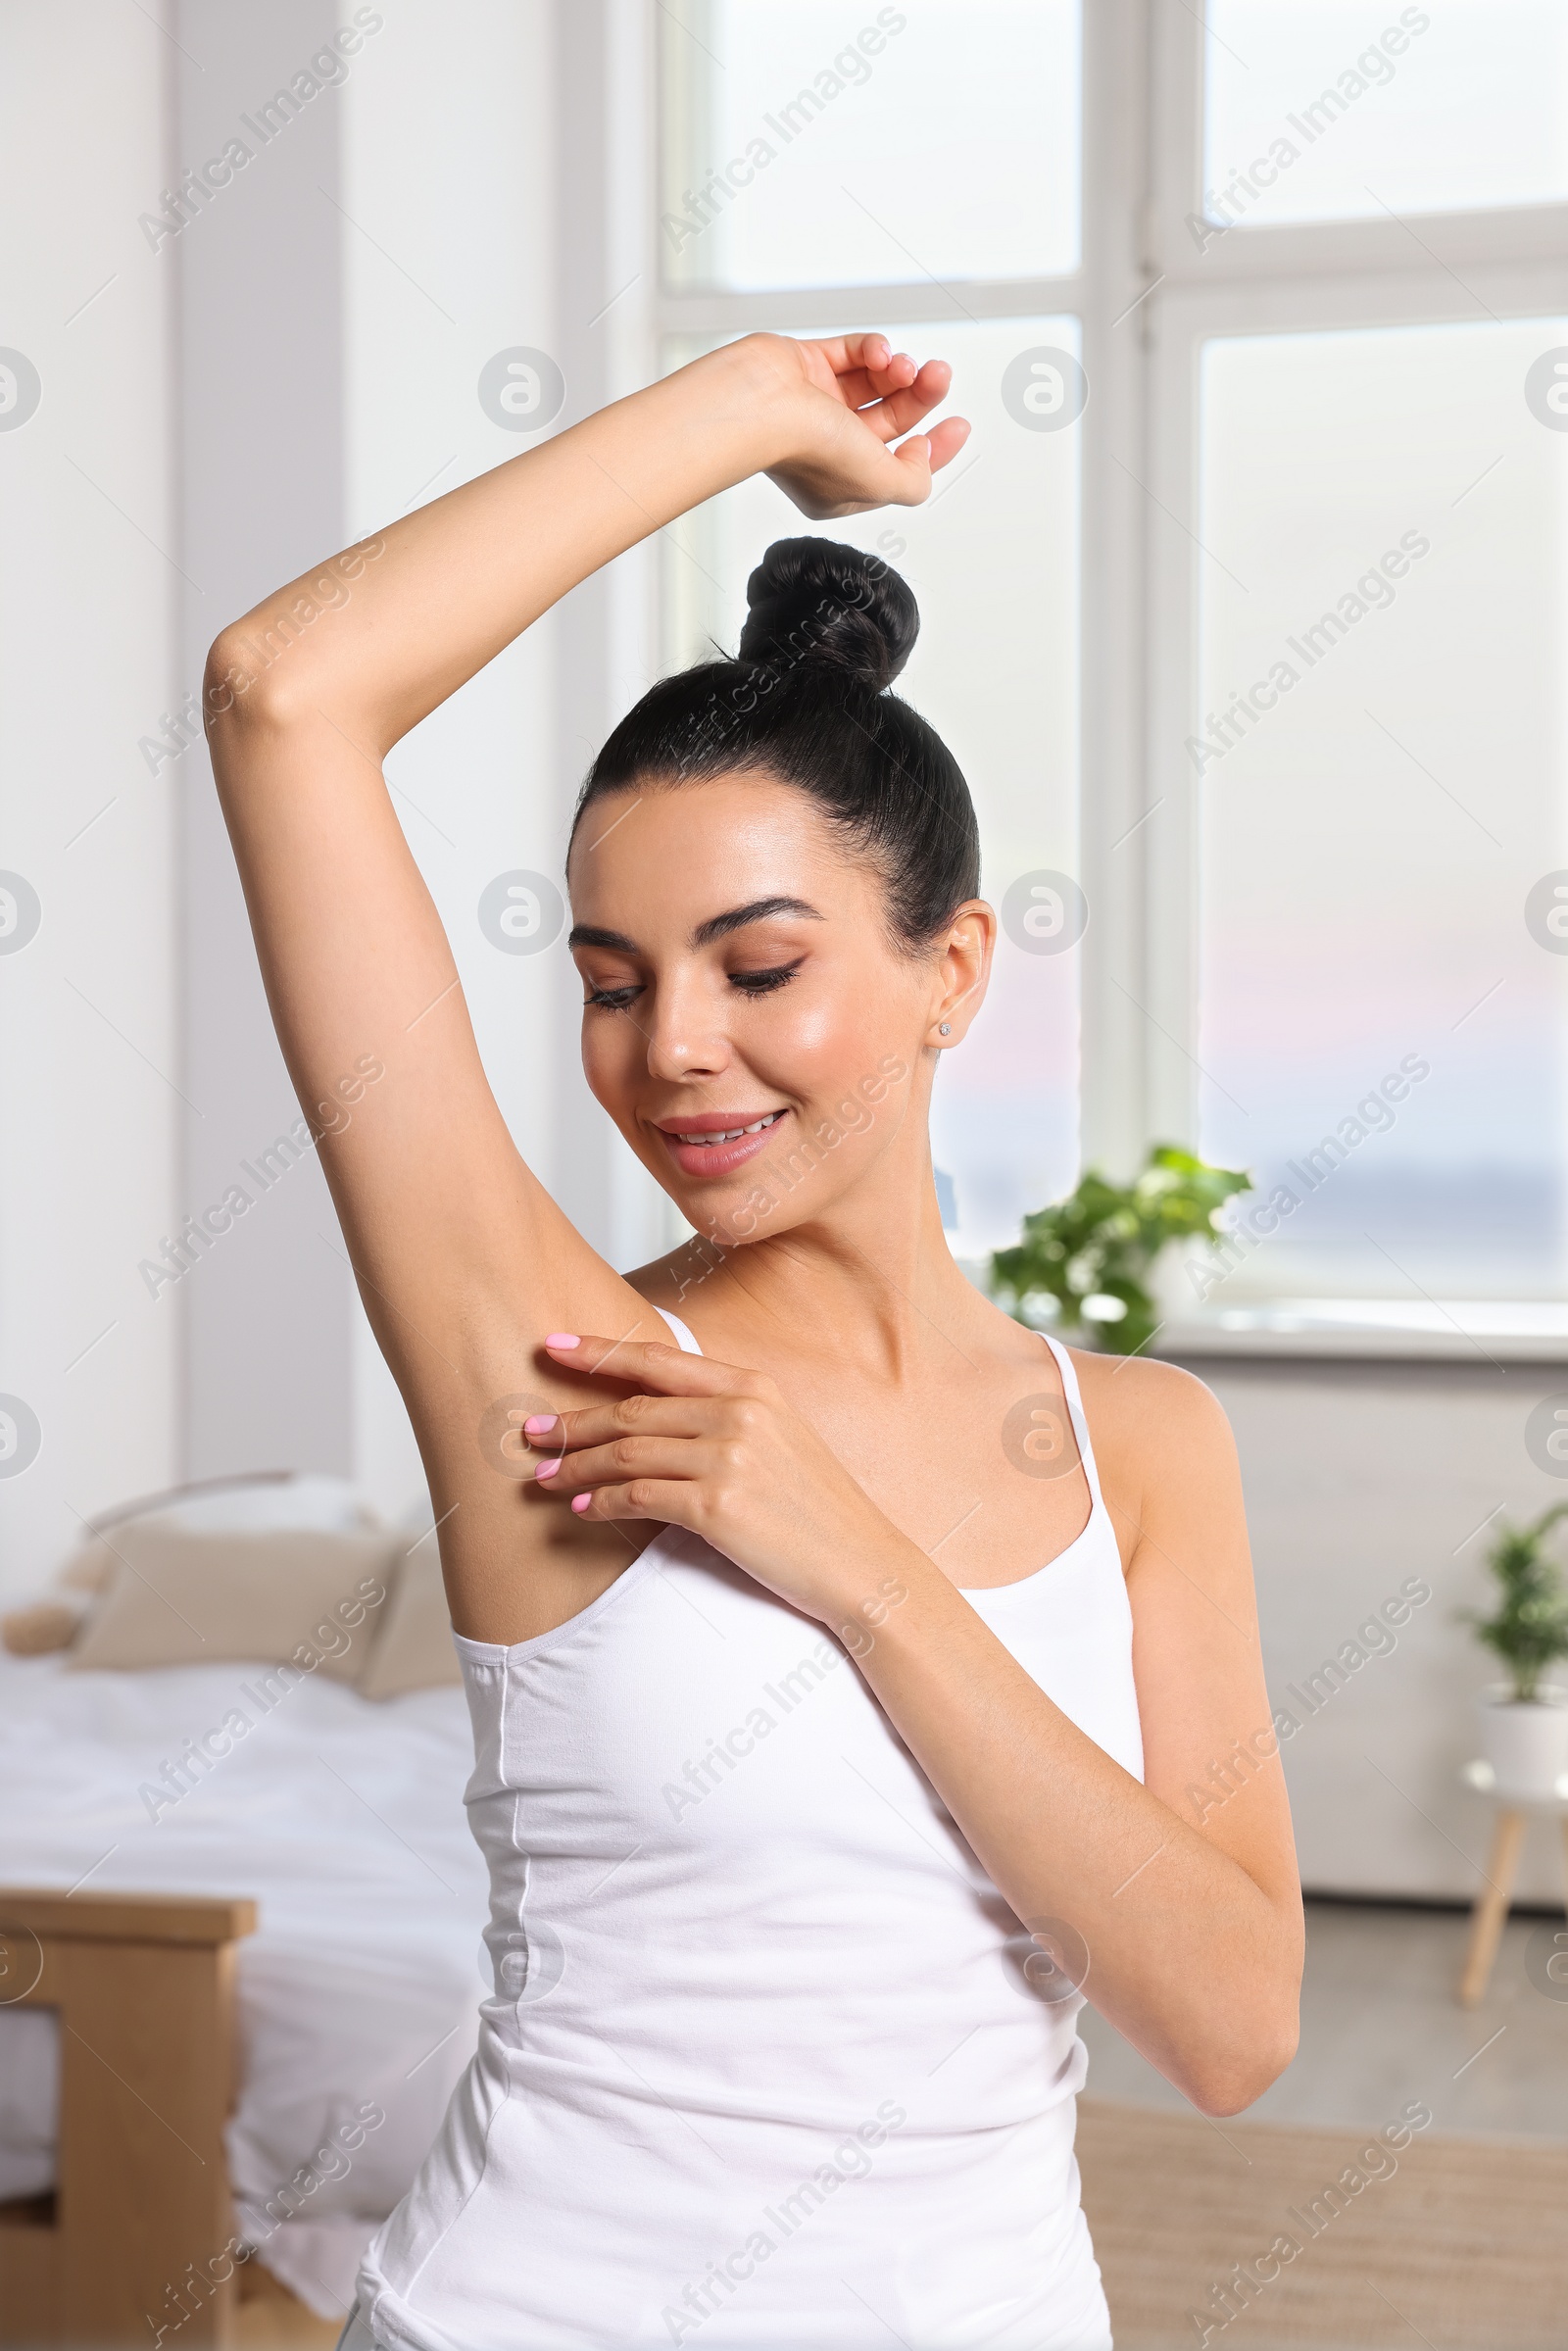 Photo of Young woman showing smooth skin after epilation indoors